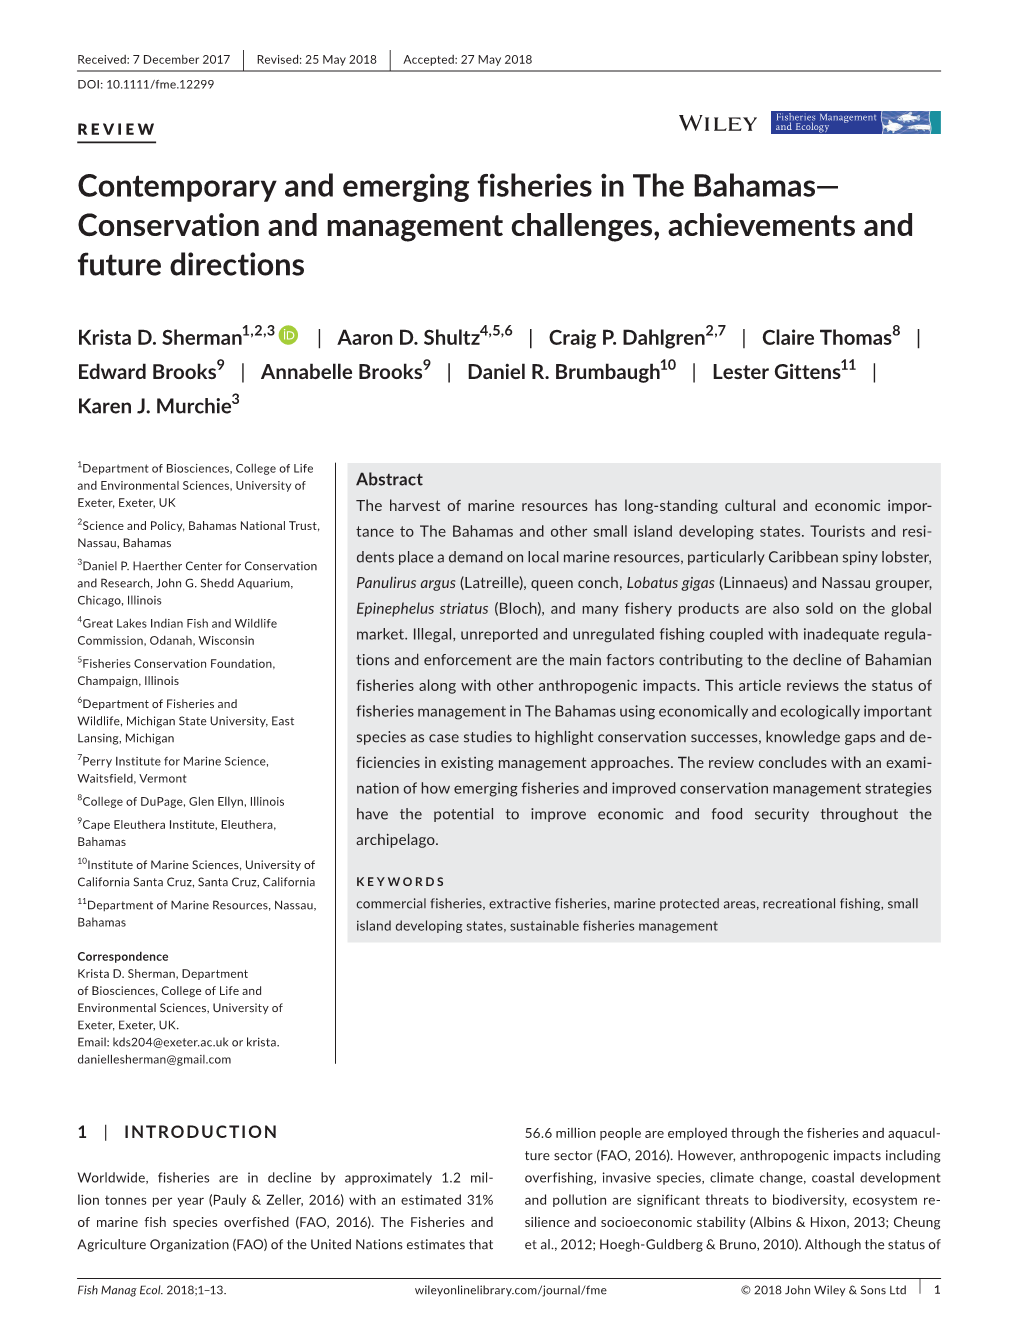 Contemporary and Emerging Fisheries in the Bahamas—Conservation and Management Challenges, Achievements and Future Directions